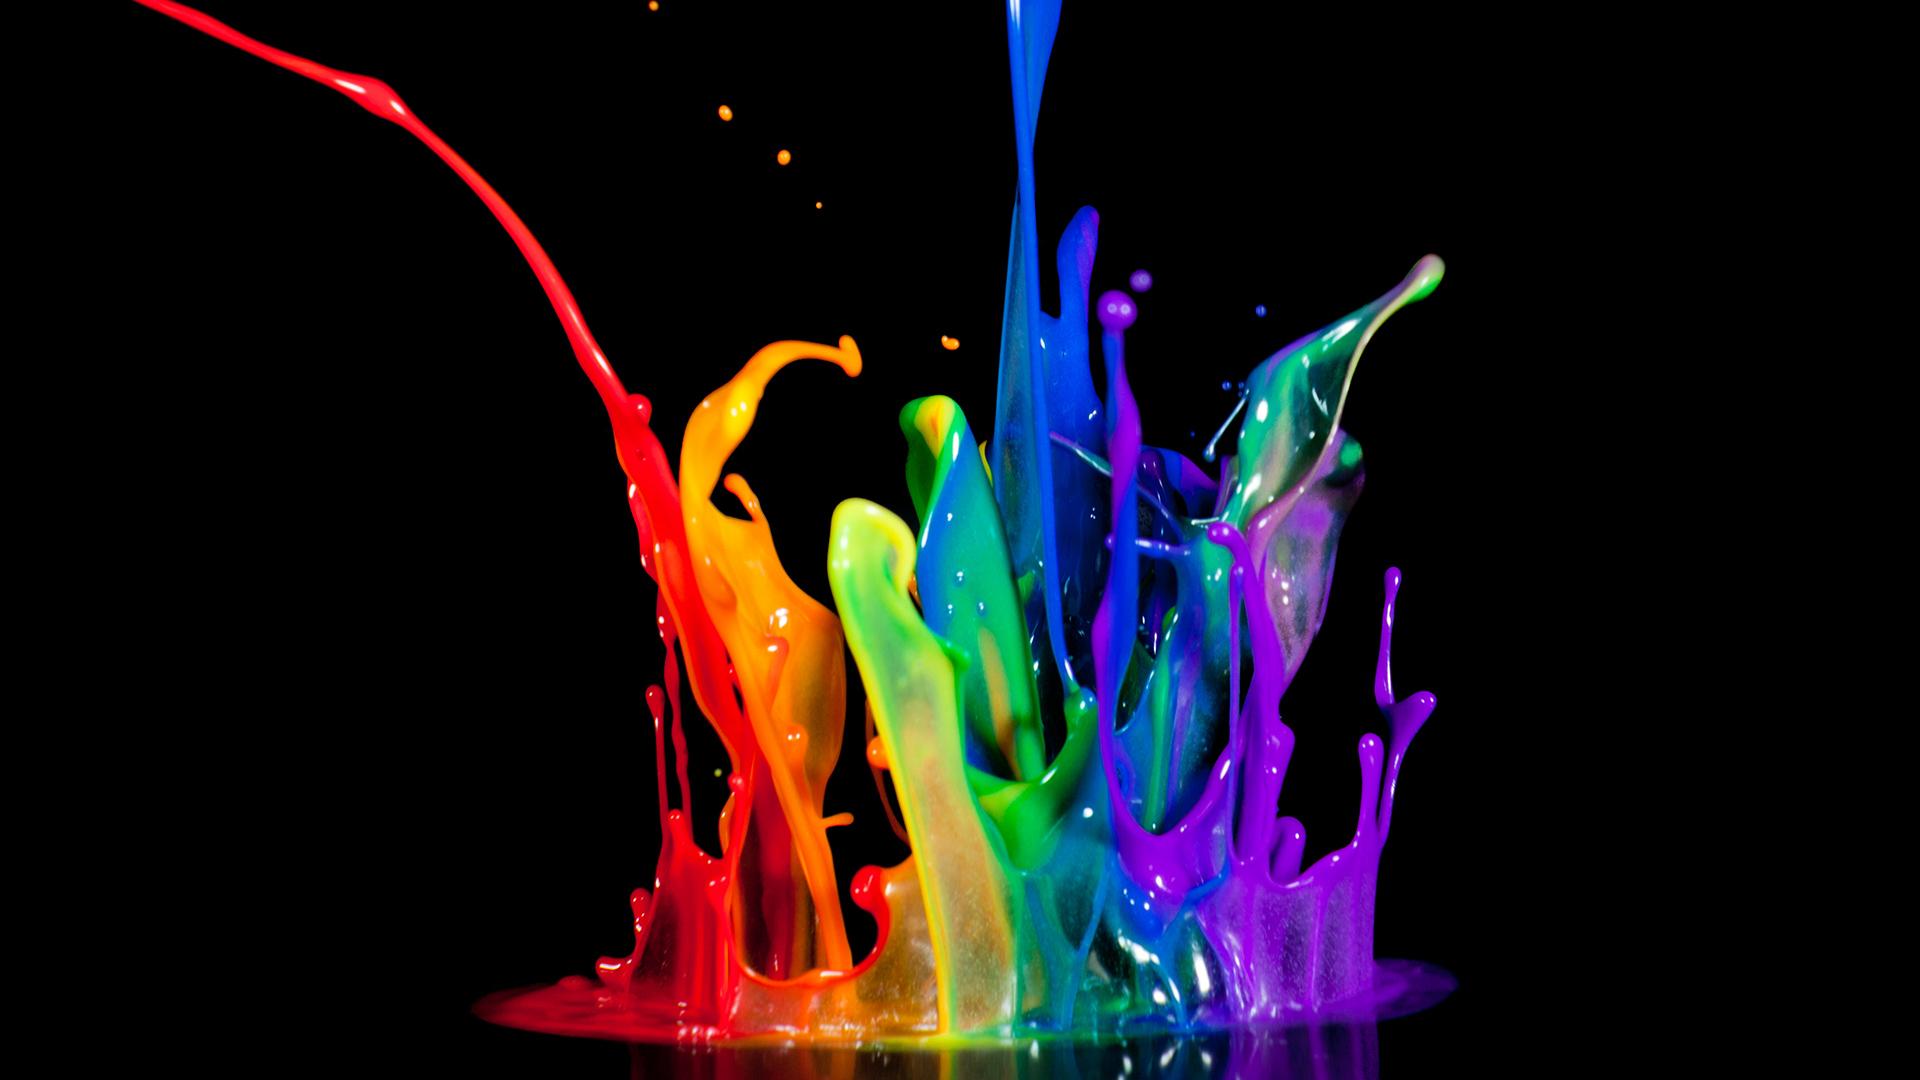 Cool Image Abstract Pic Colorful Pictures Wallpaper Abstrak